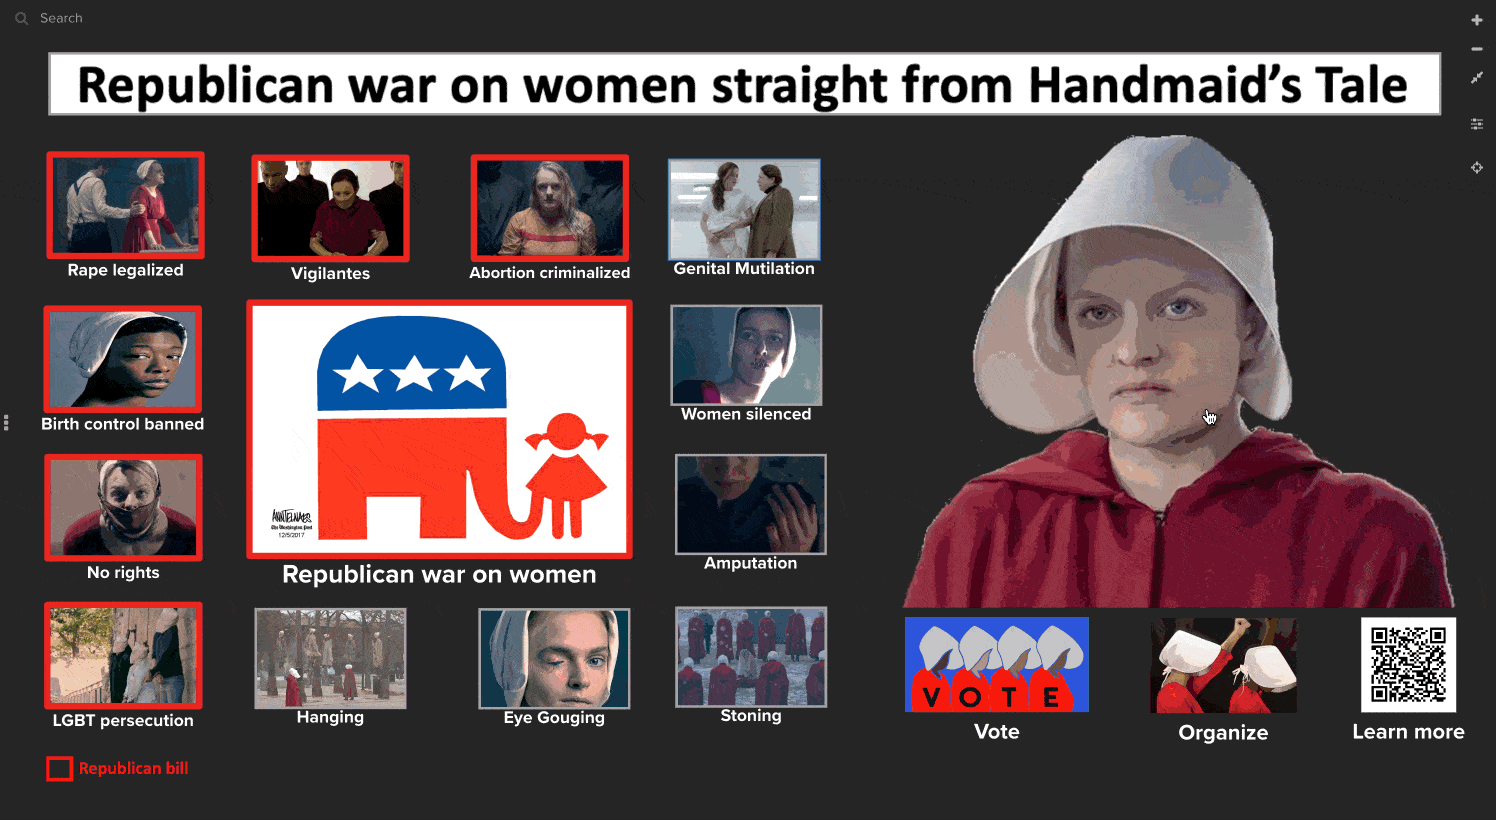 Republican plan to cut abortion rights is straight out of the Handmaid's Tale.